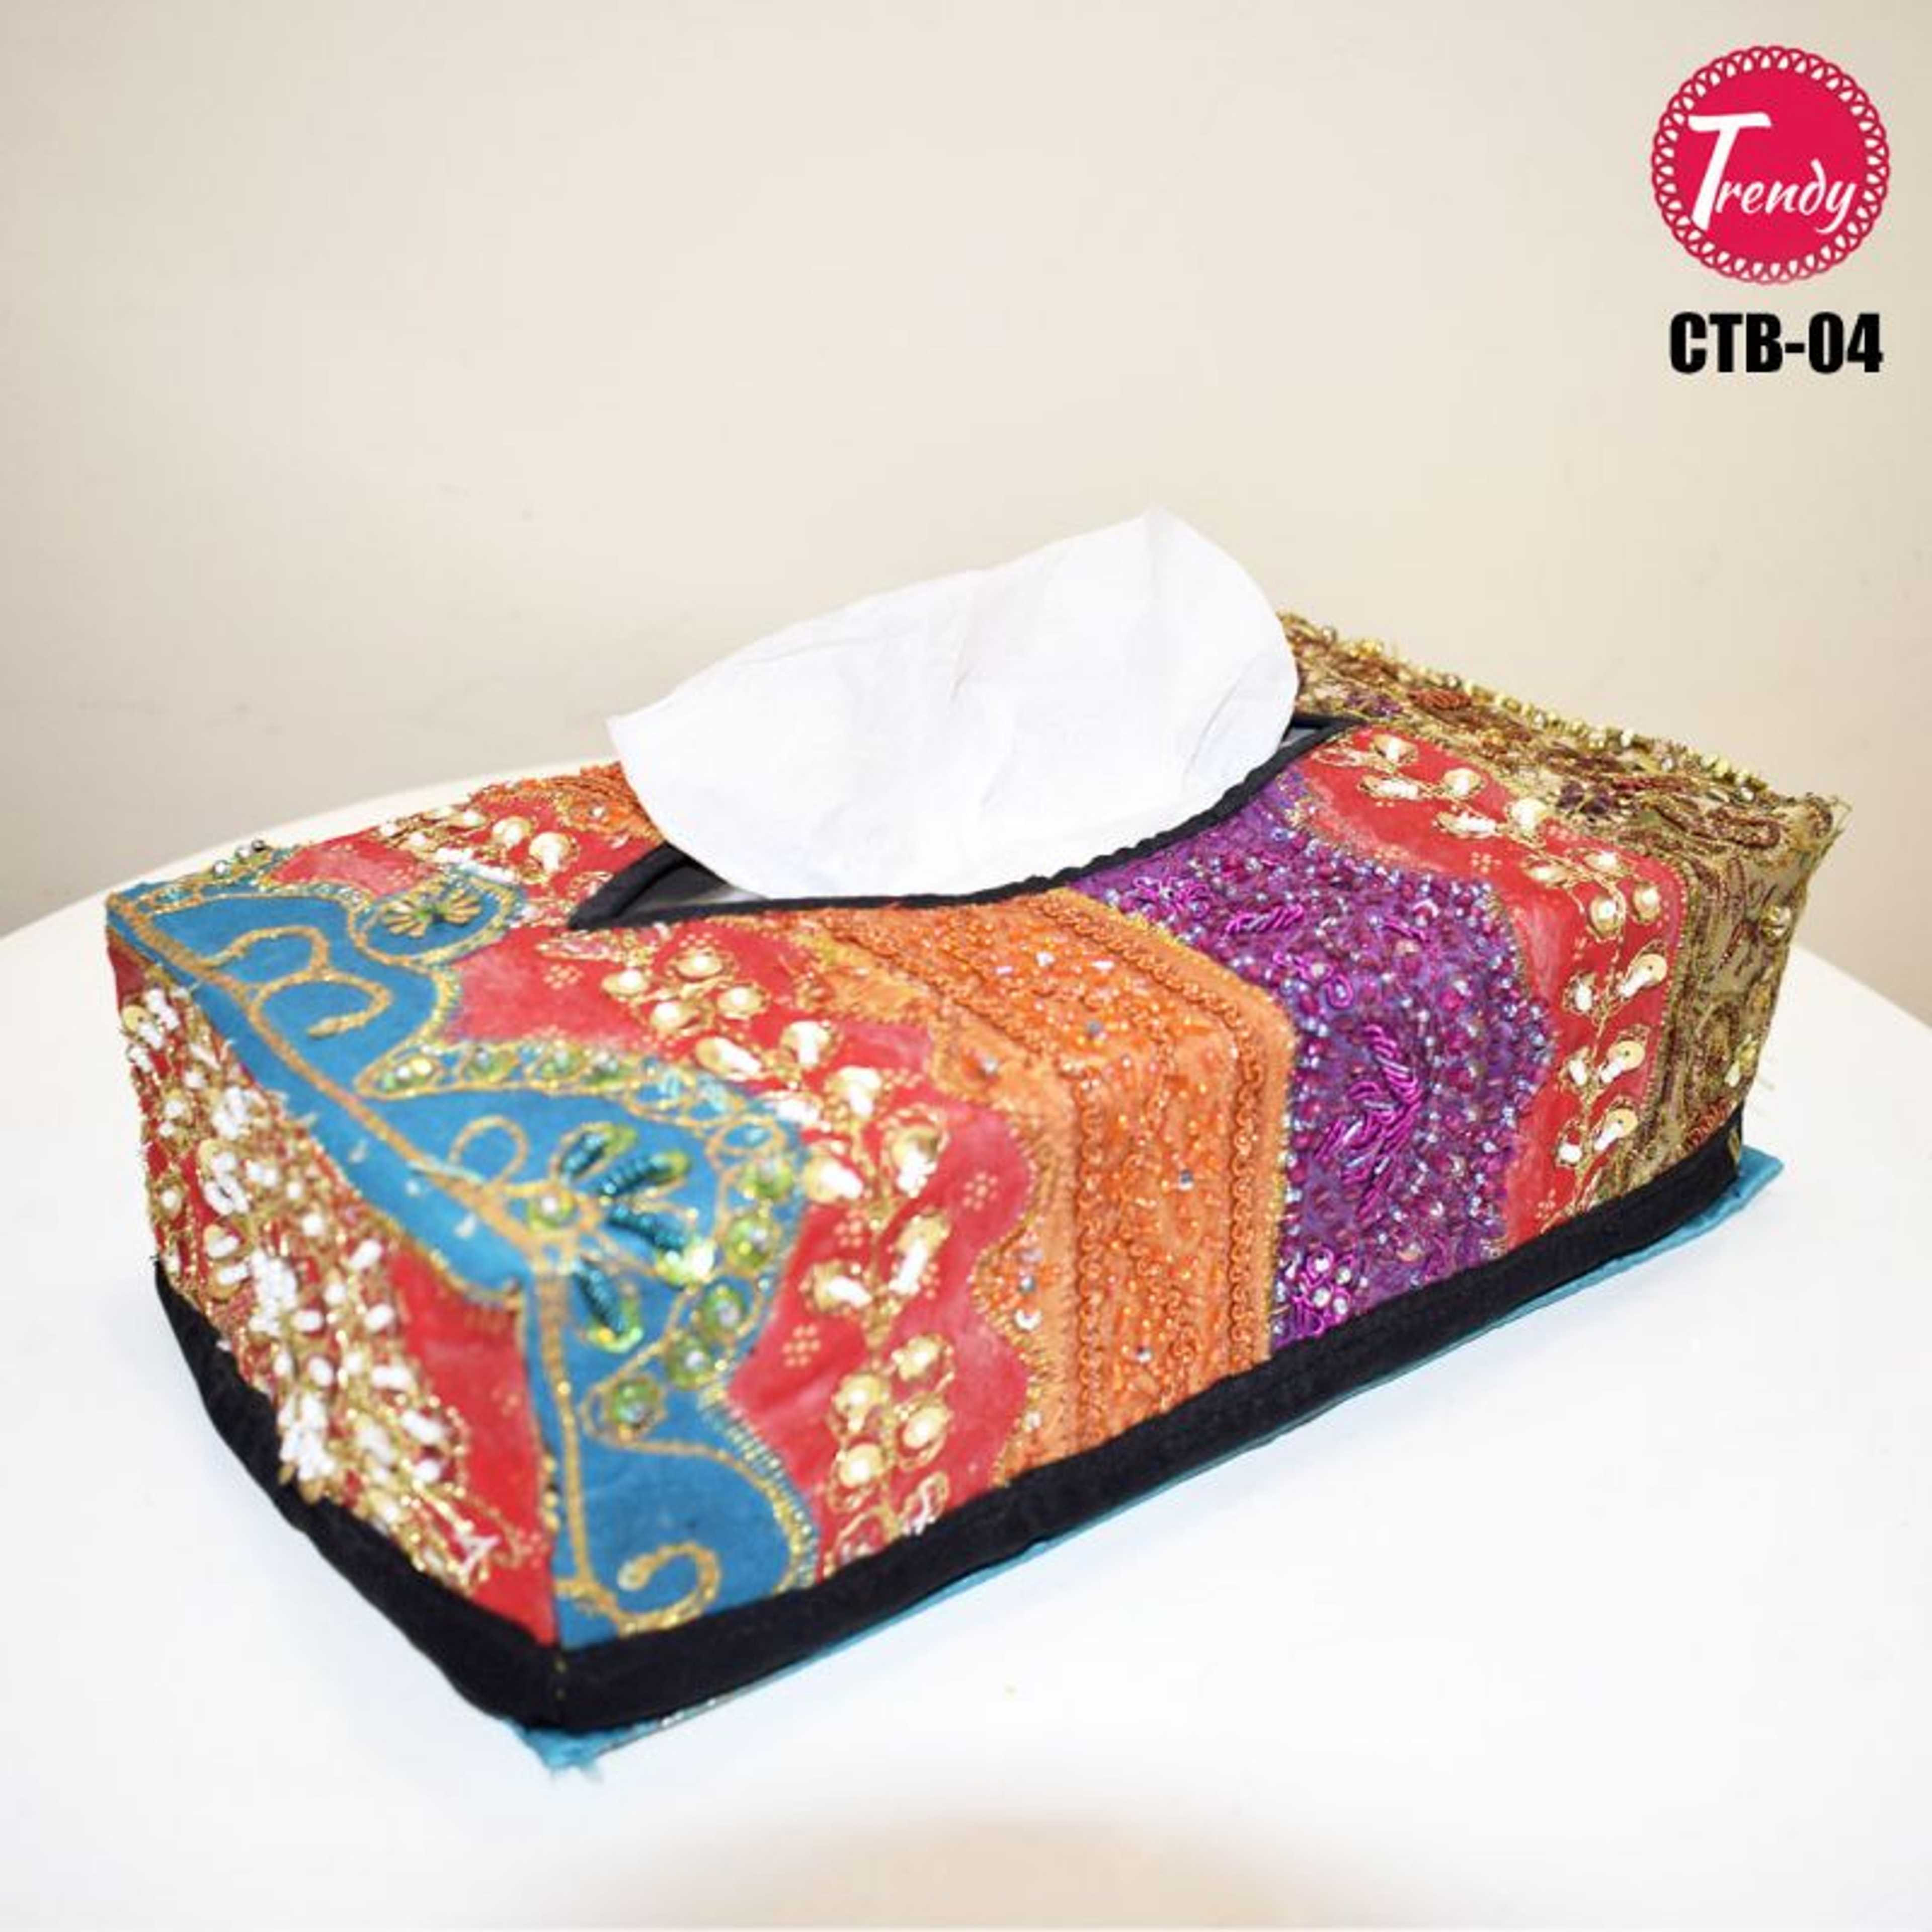 Sindhi Hand Embroidery Fabric Tissue Box Cover CTB-04